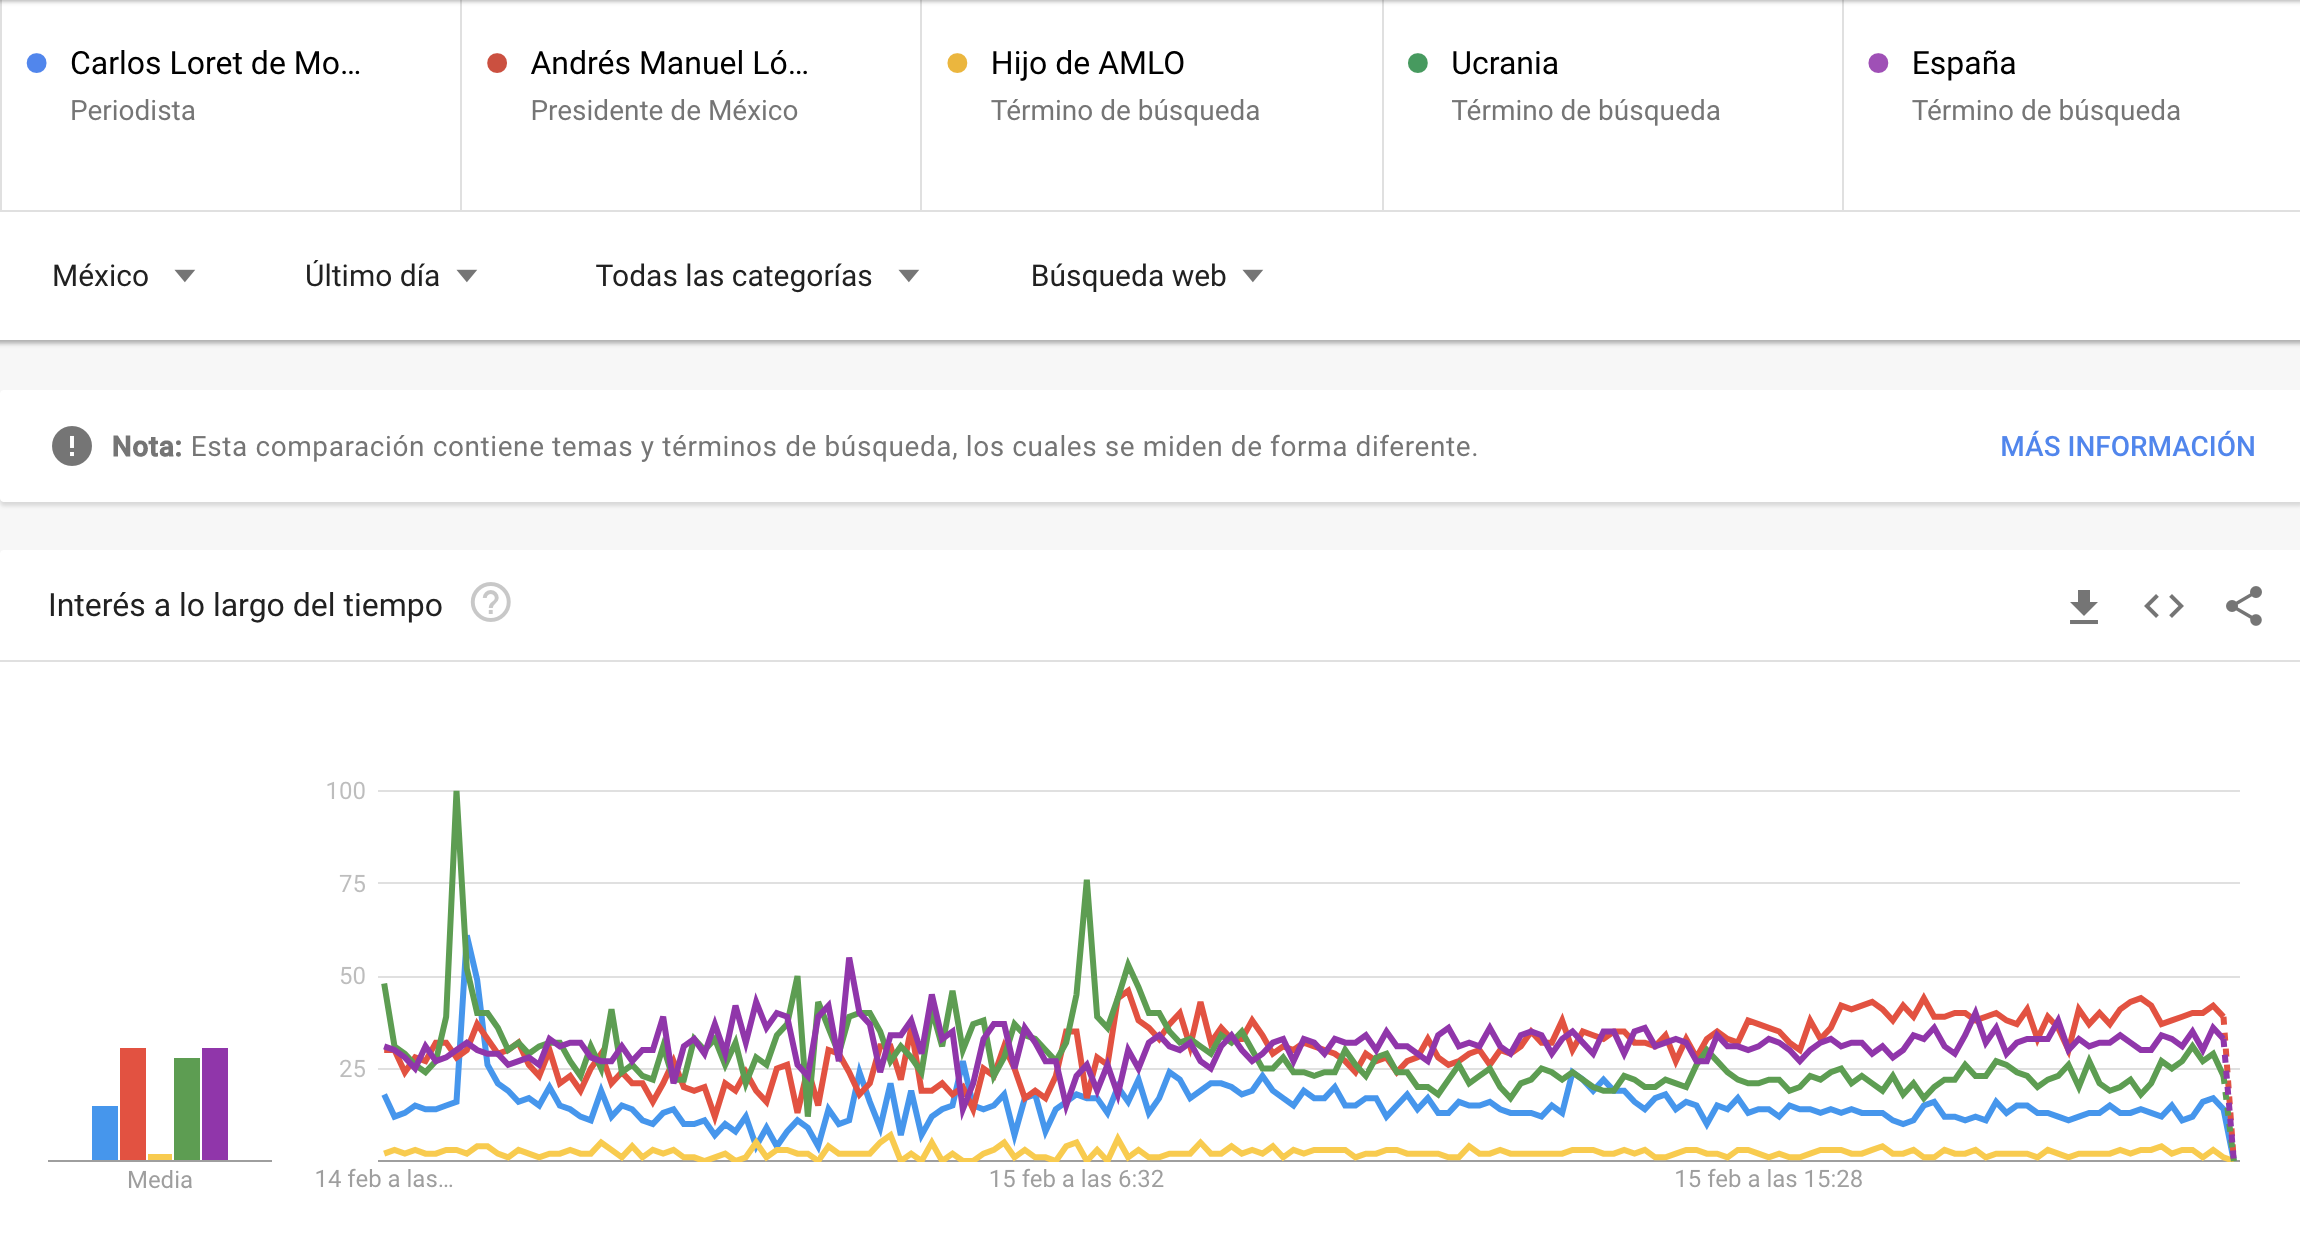 This is how AMLO benefited Loret de Mola in conversation and digital search